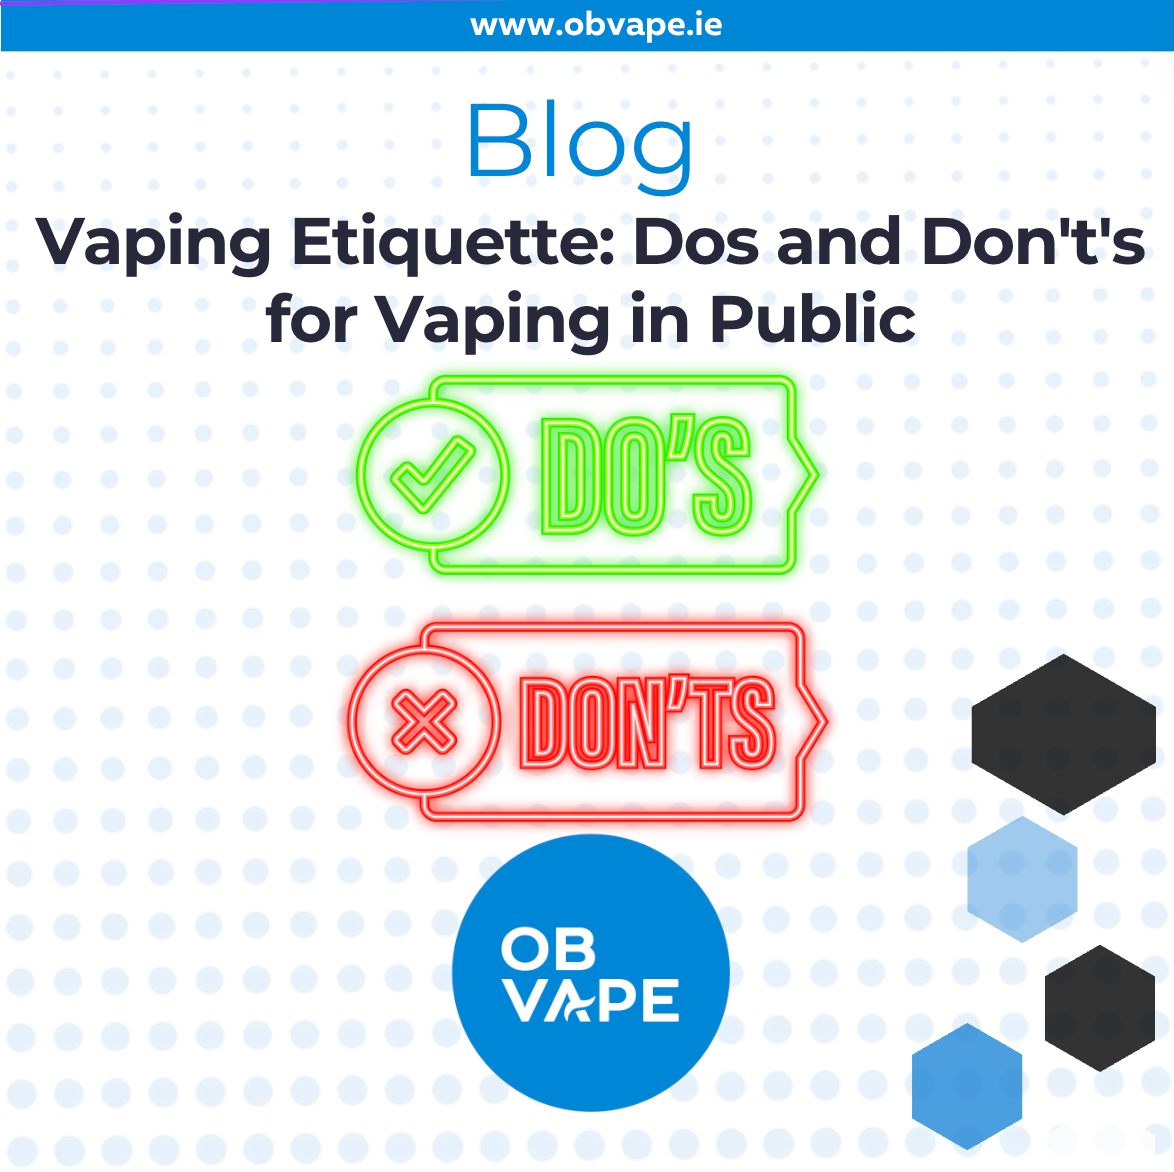 Vaping Etiquette: Dos and Don'ts for Vaping in Public